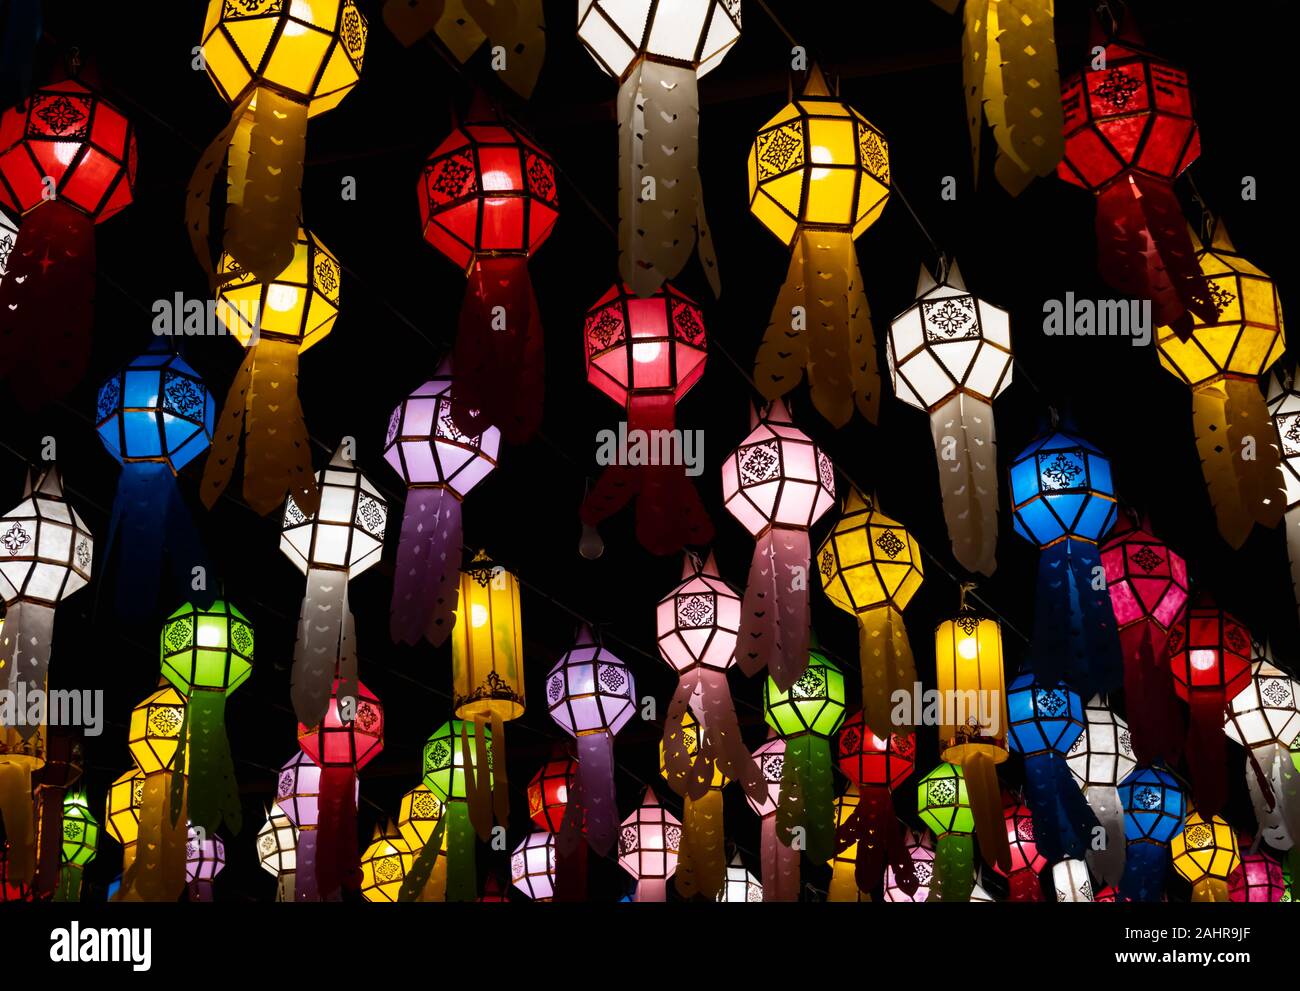 Colorful Paper Lanterns or Paper Lamp in Loi Krathong Festival on Night Scene in Zoom View. Paper lanterns in Yi Peng festival Stock Photo